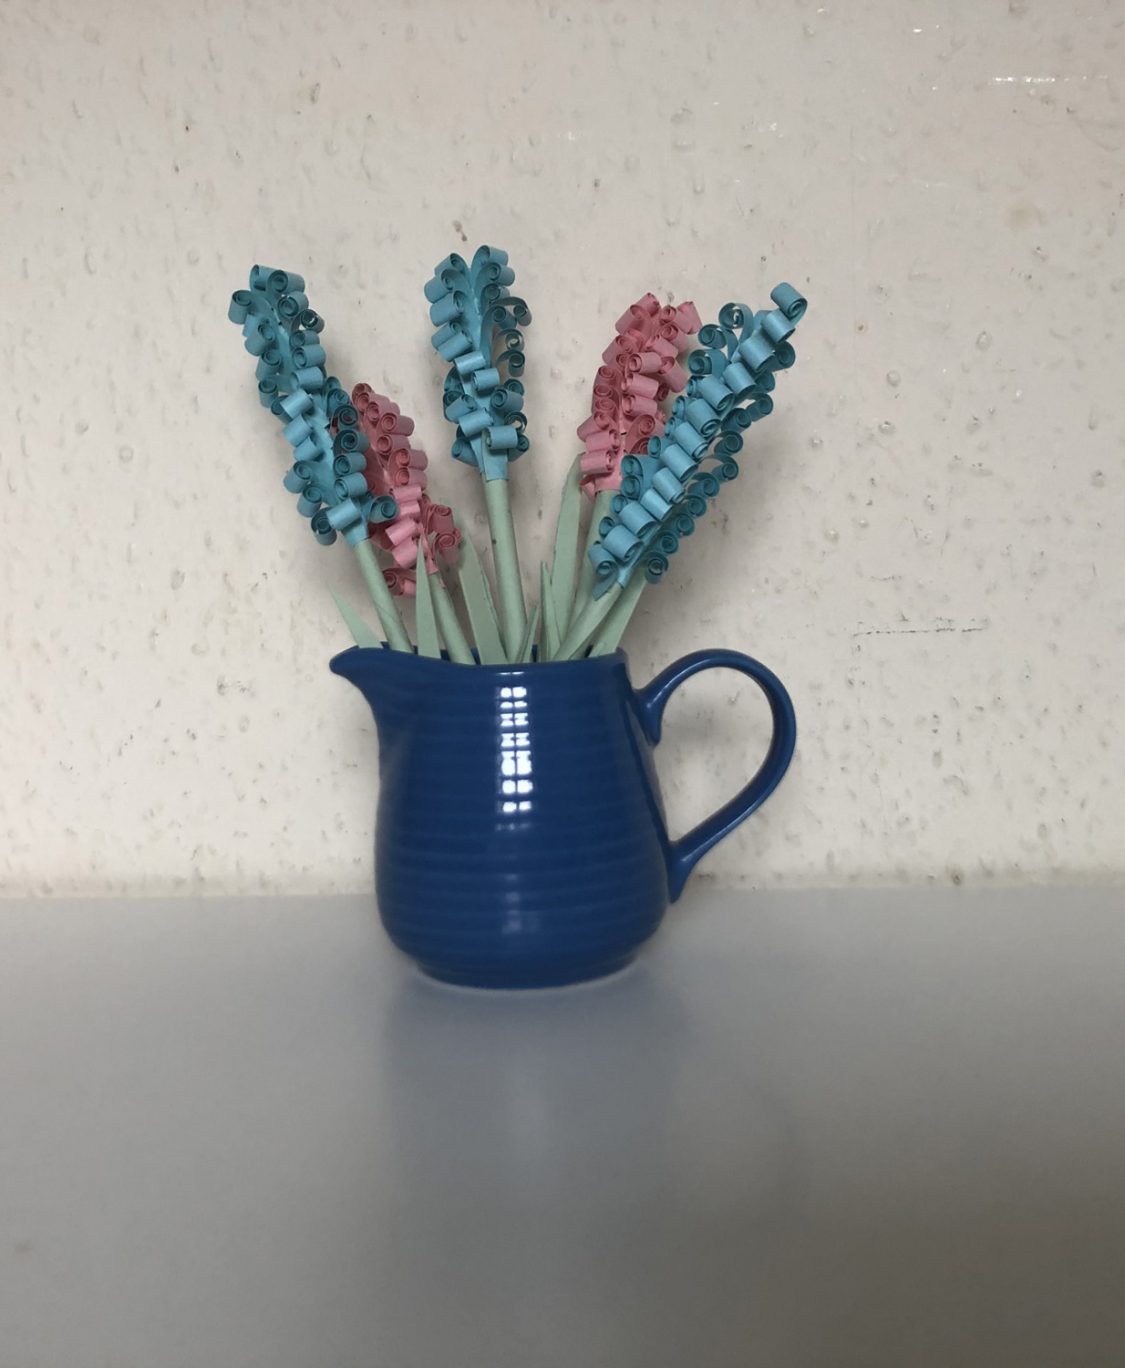 Monday Makes: Make your own paper hyacinths